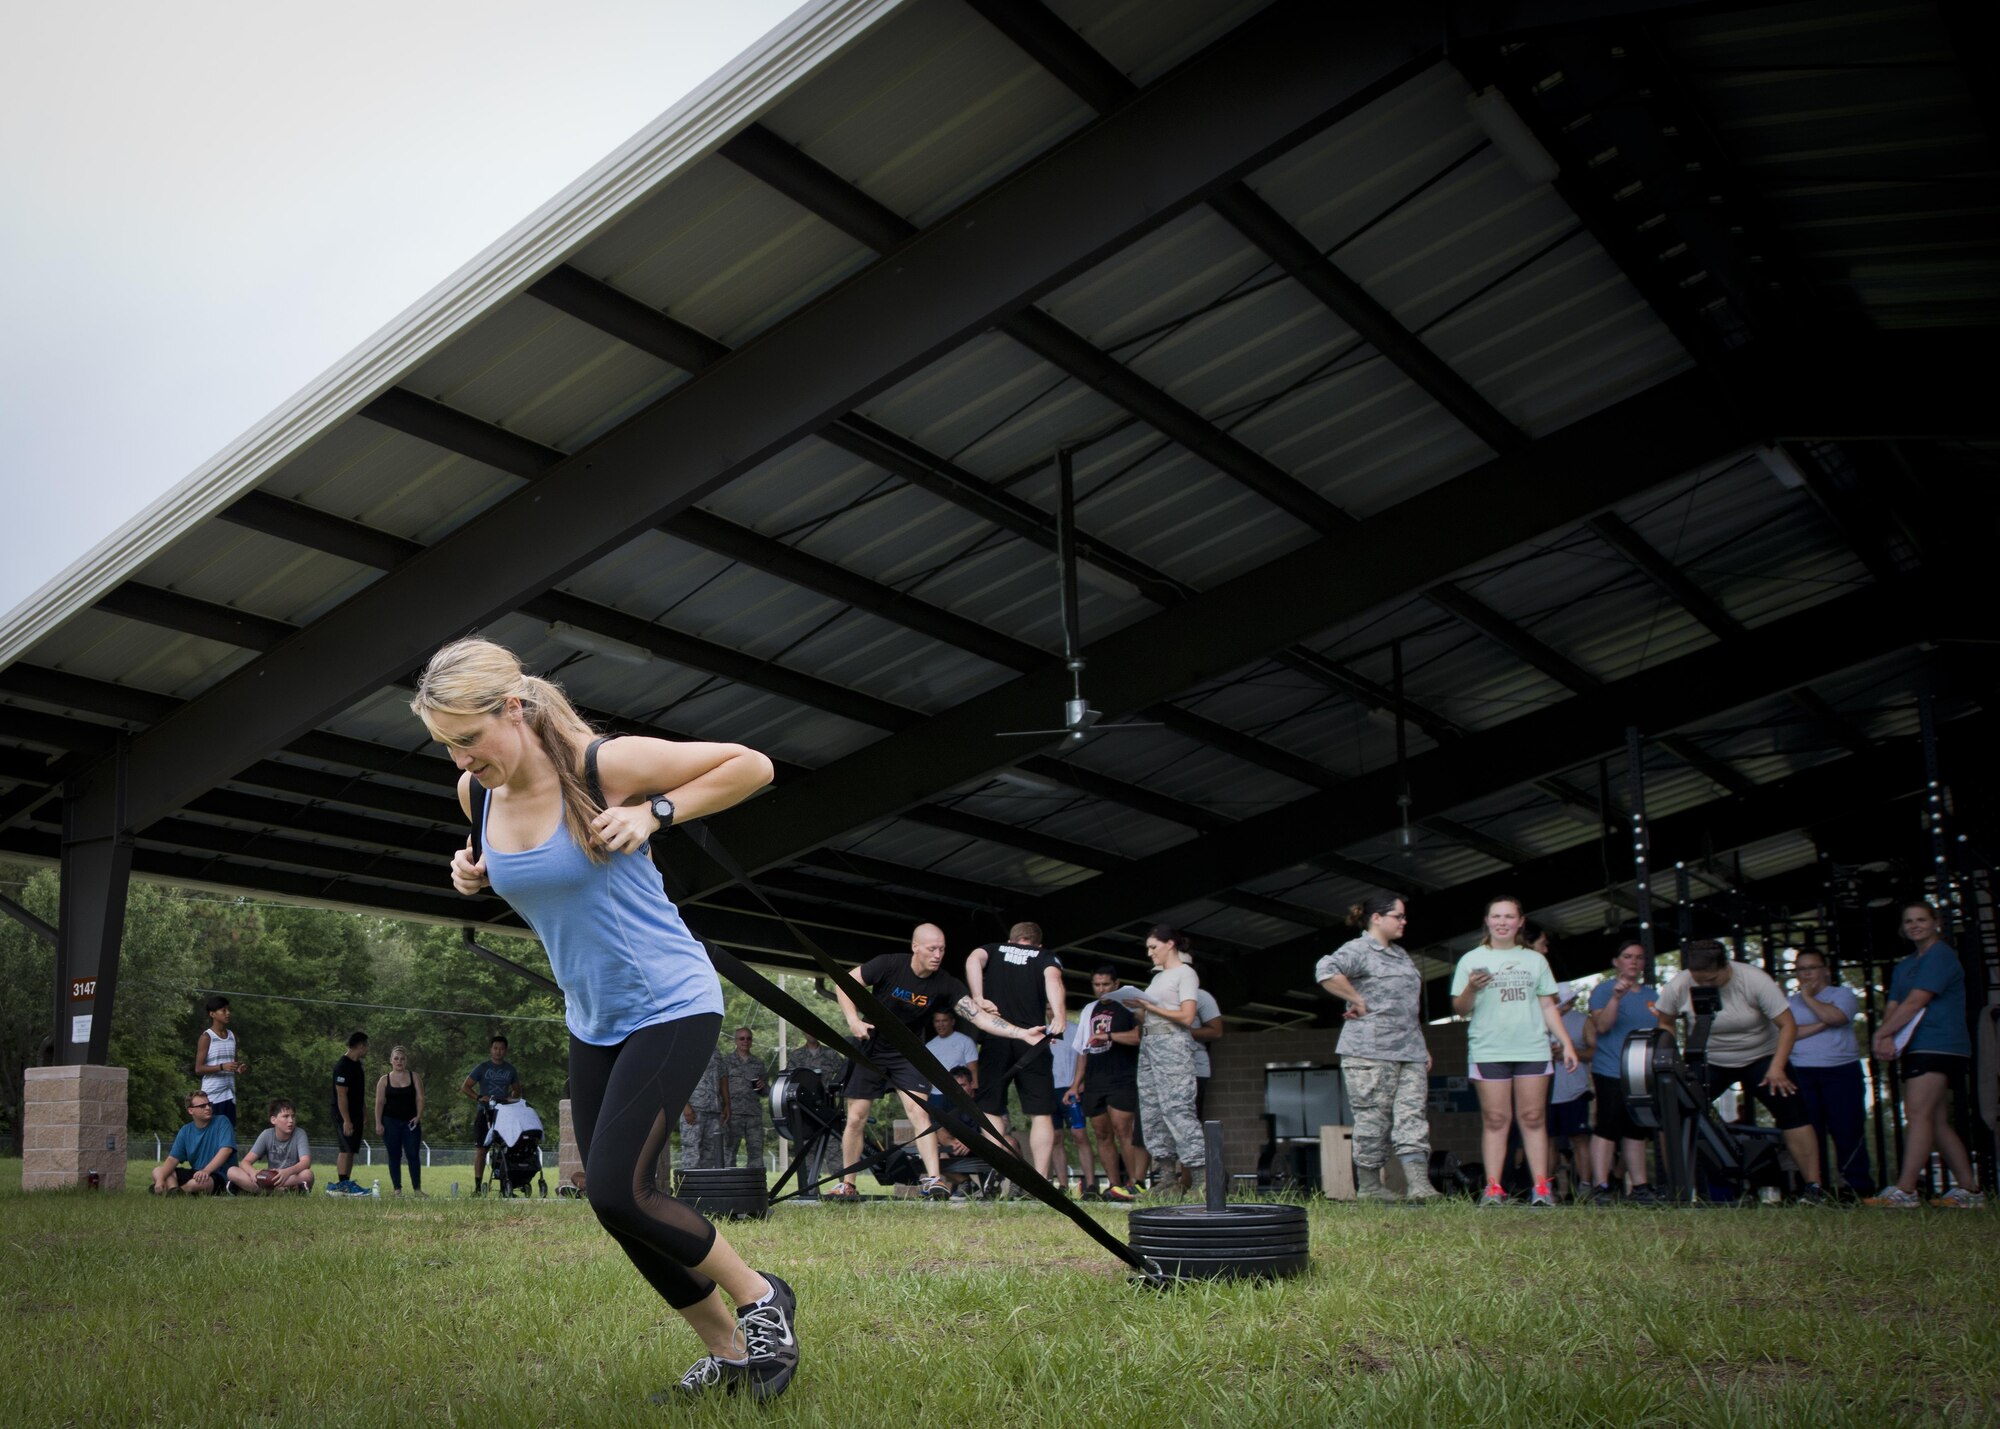 Maj. Pamela Wilson, the 919th Special Operations Communications Squadron commander, starts her turn pulling a weighted sled during a team combat fit competition June 11 at Duke Field, Fla.  The three-round competition pushed the teams to their limits with repetitive weight lifting, rowing, sled-pulling and other kinetic activities.  (U.S. Air Force photo/Tech. Sgt. Sam King)